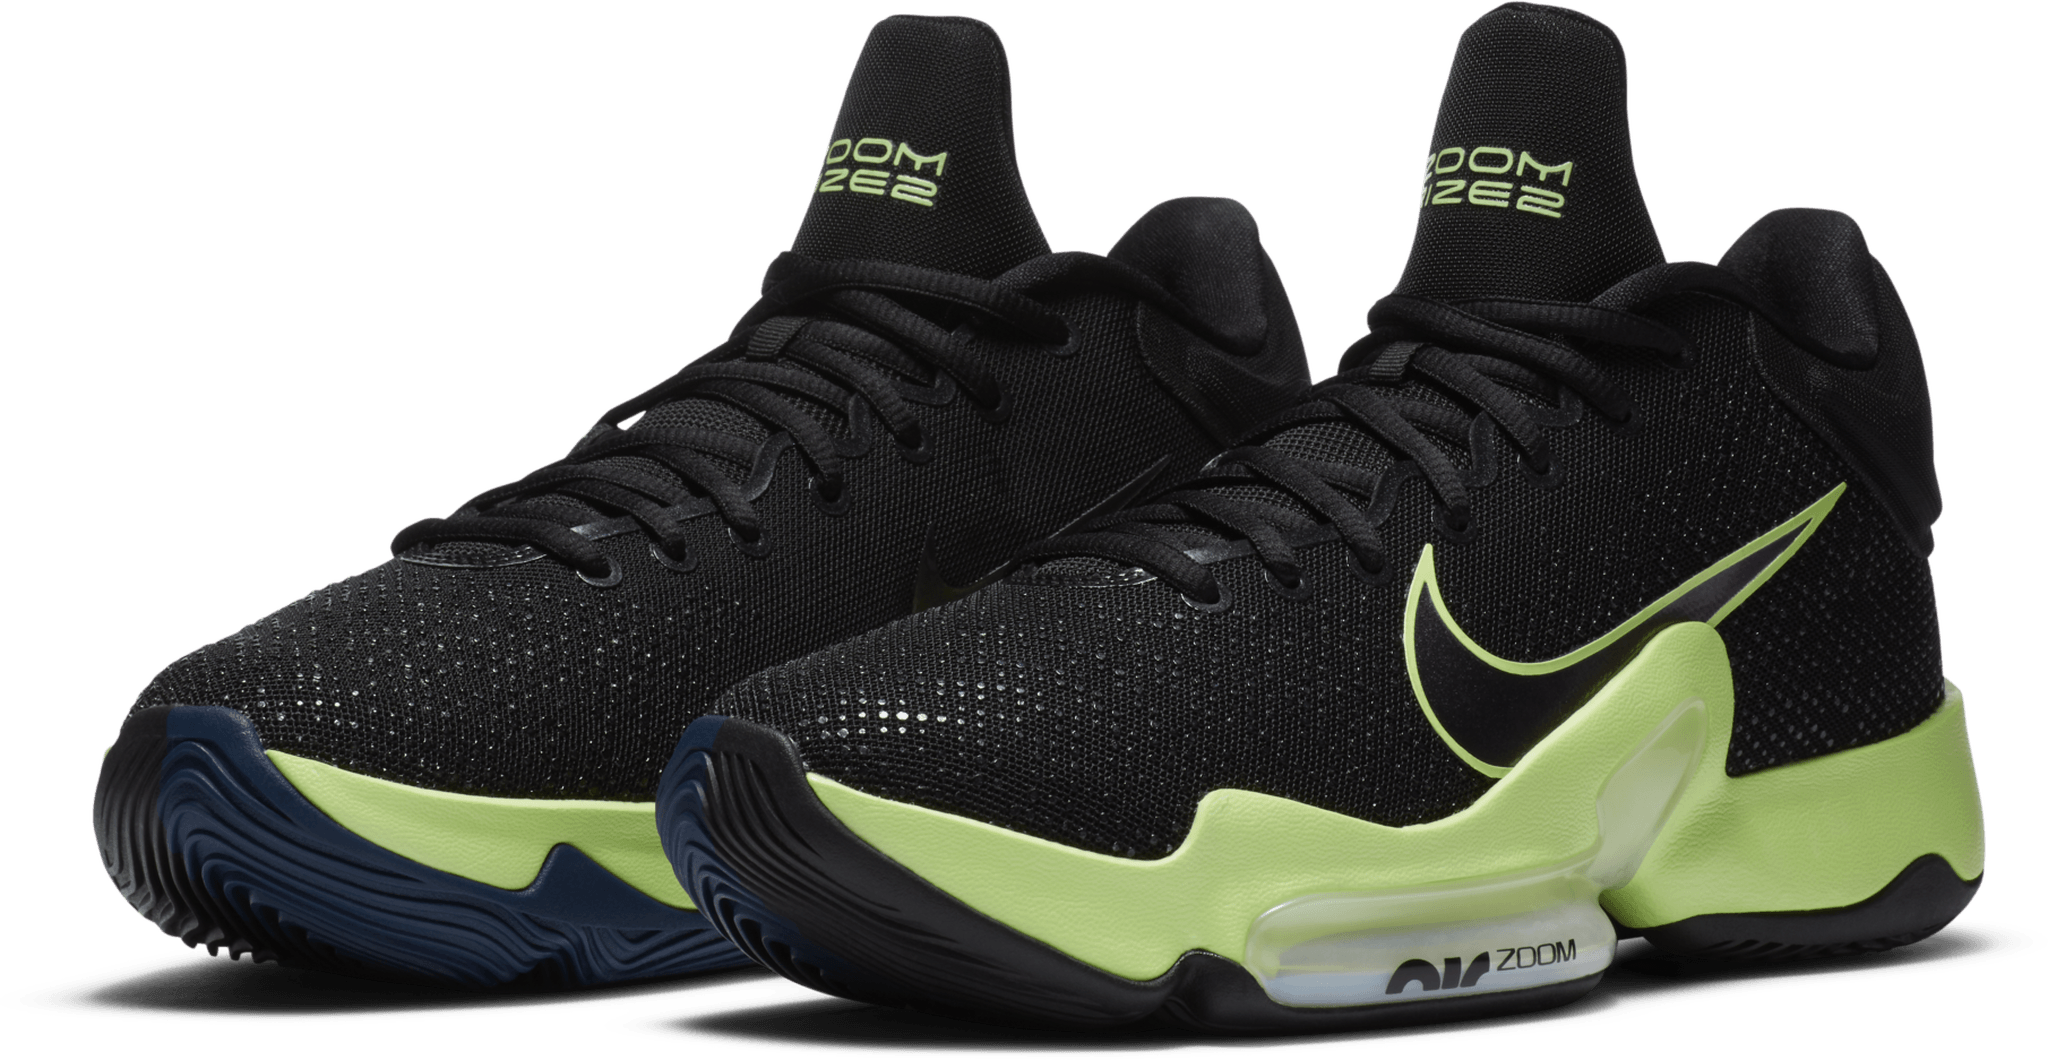 Nike Zoom Rize 2 - Review, Deals, Pics of 5 Colorways